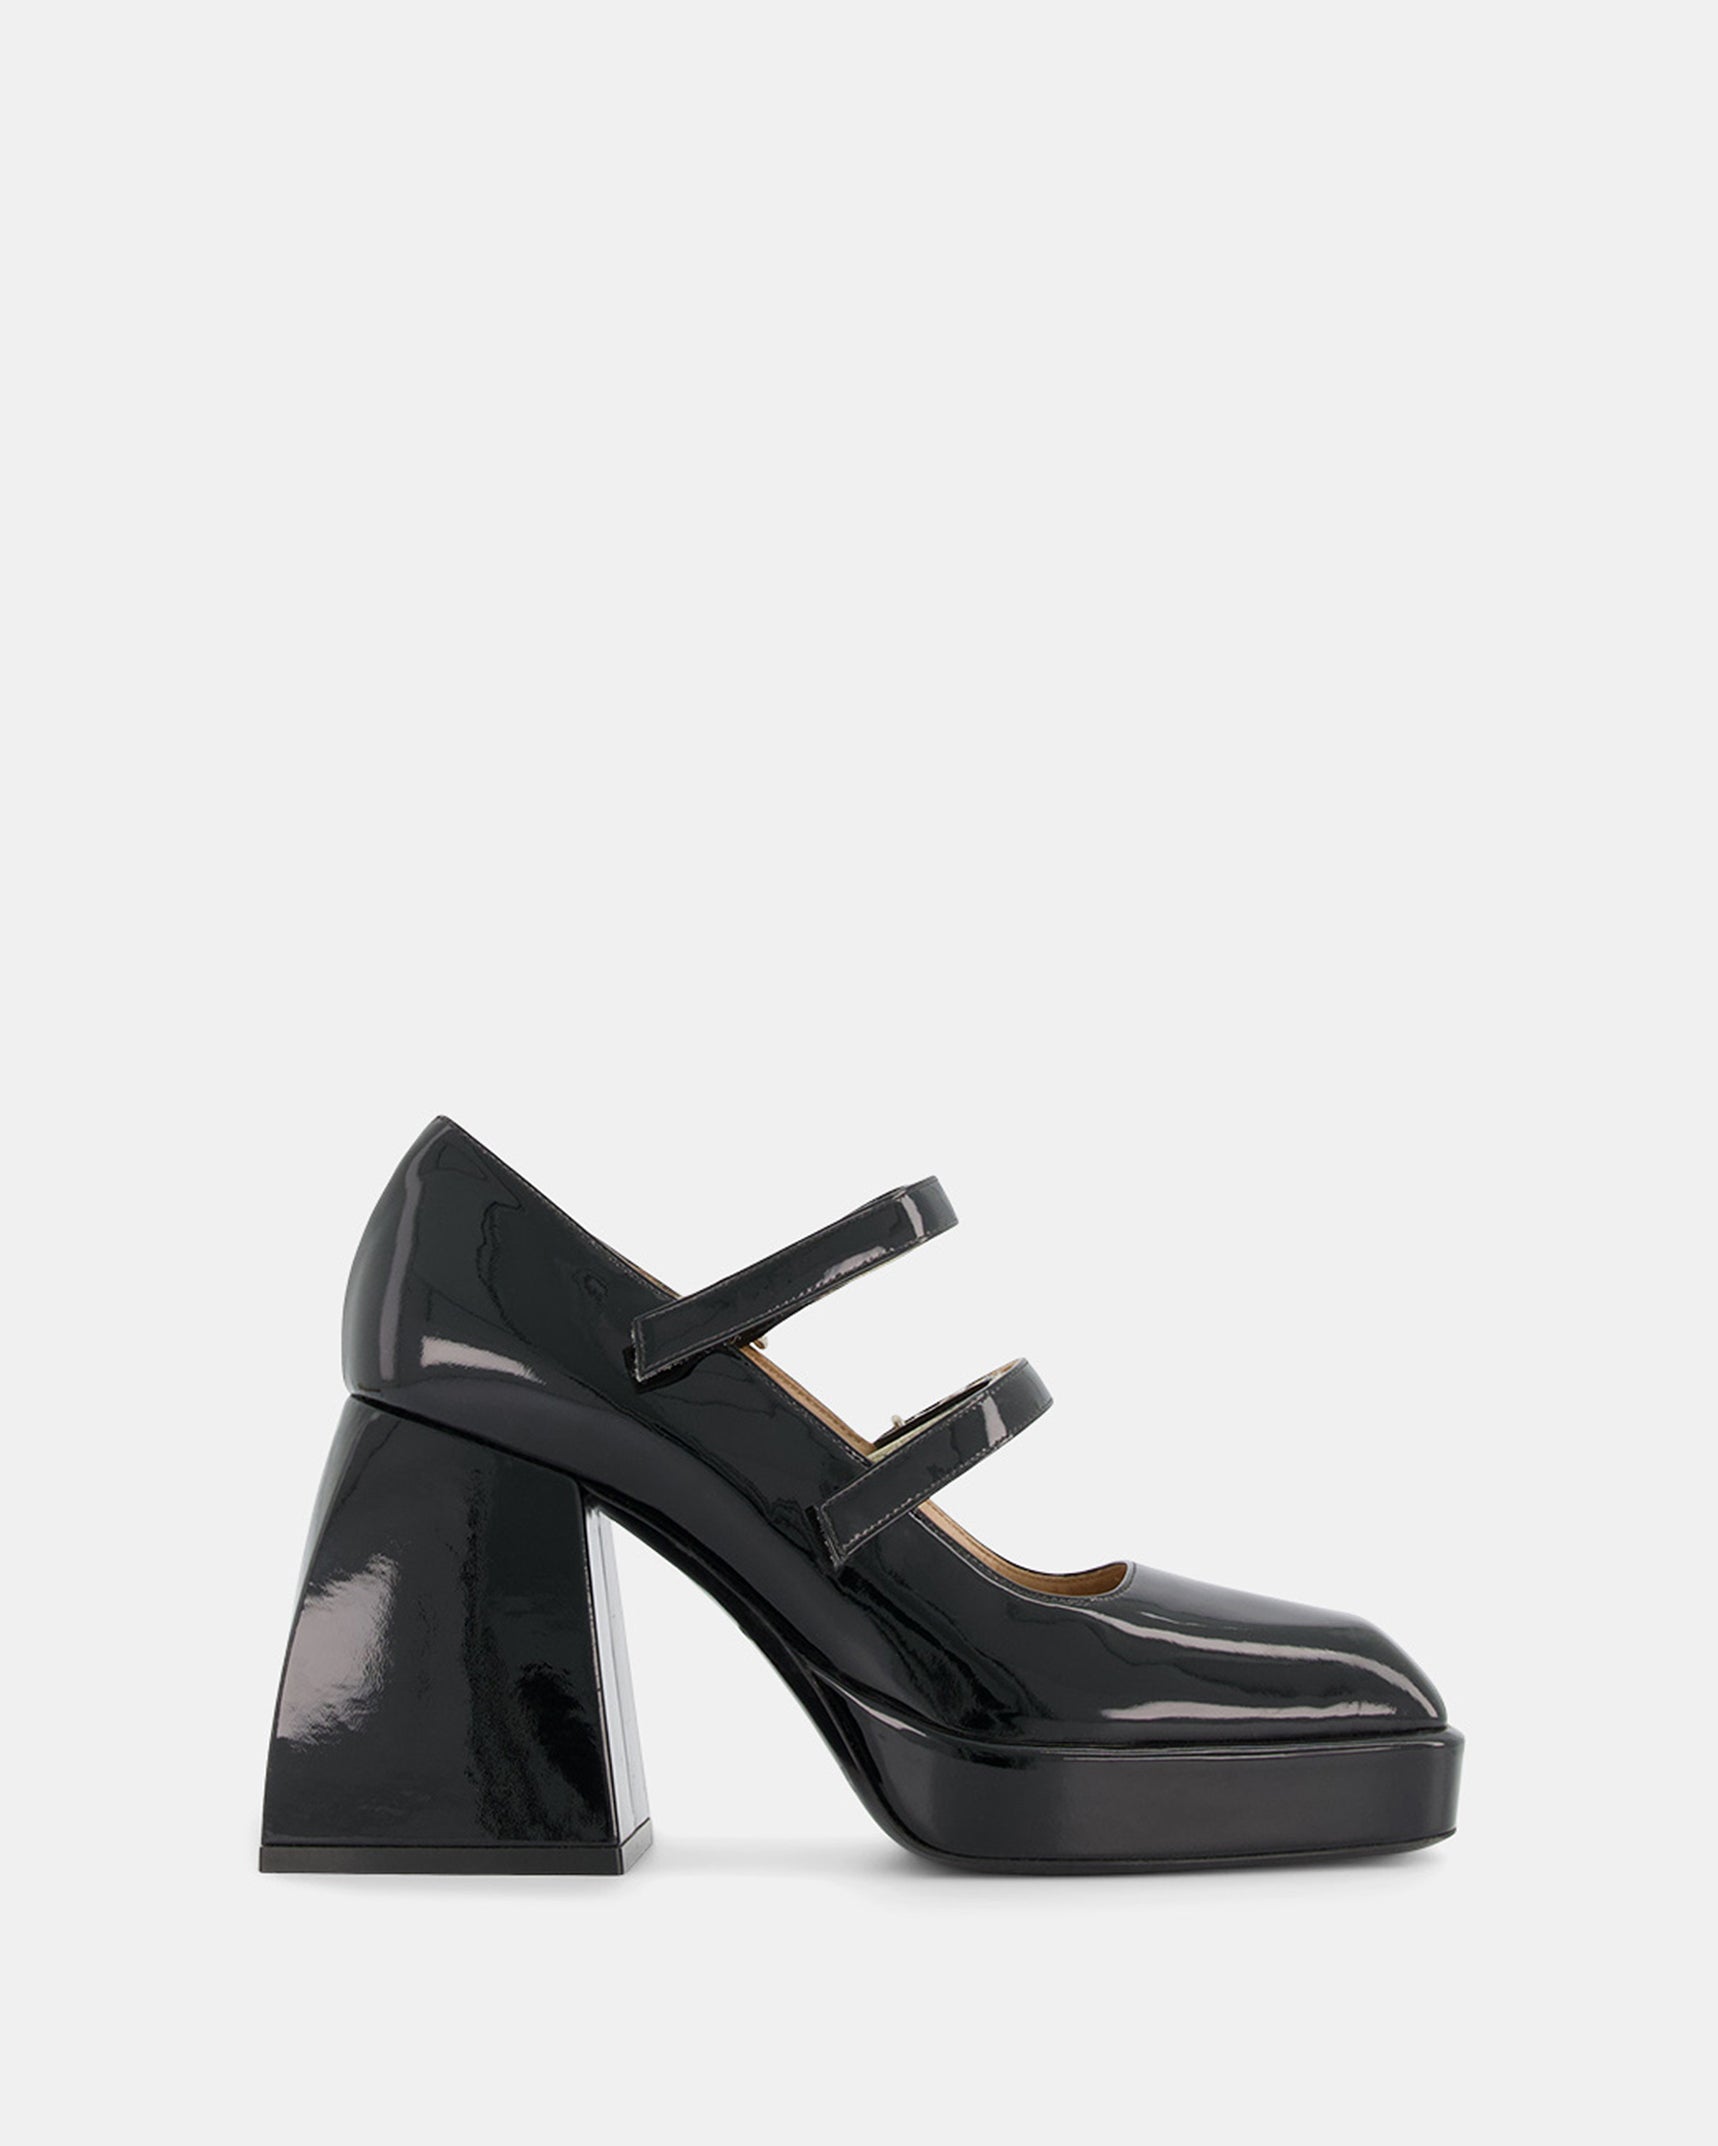 Nodaleto Babies mary jane heel in black patent leather